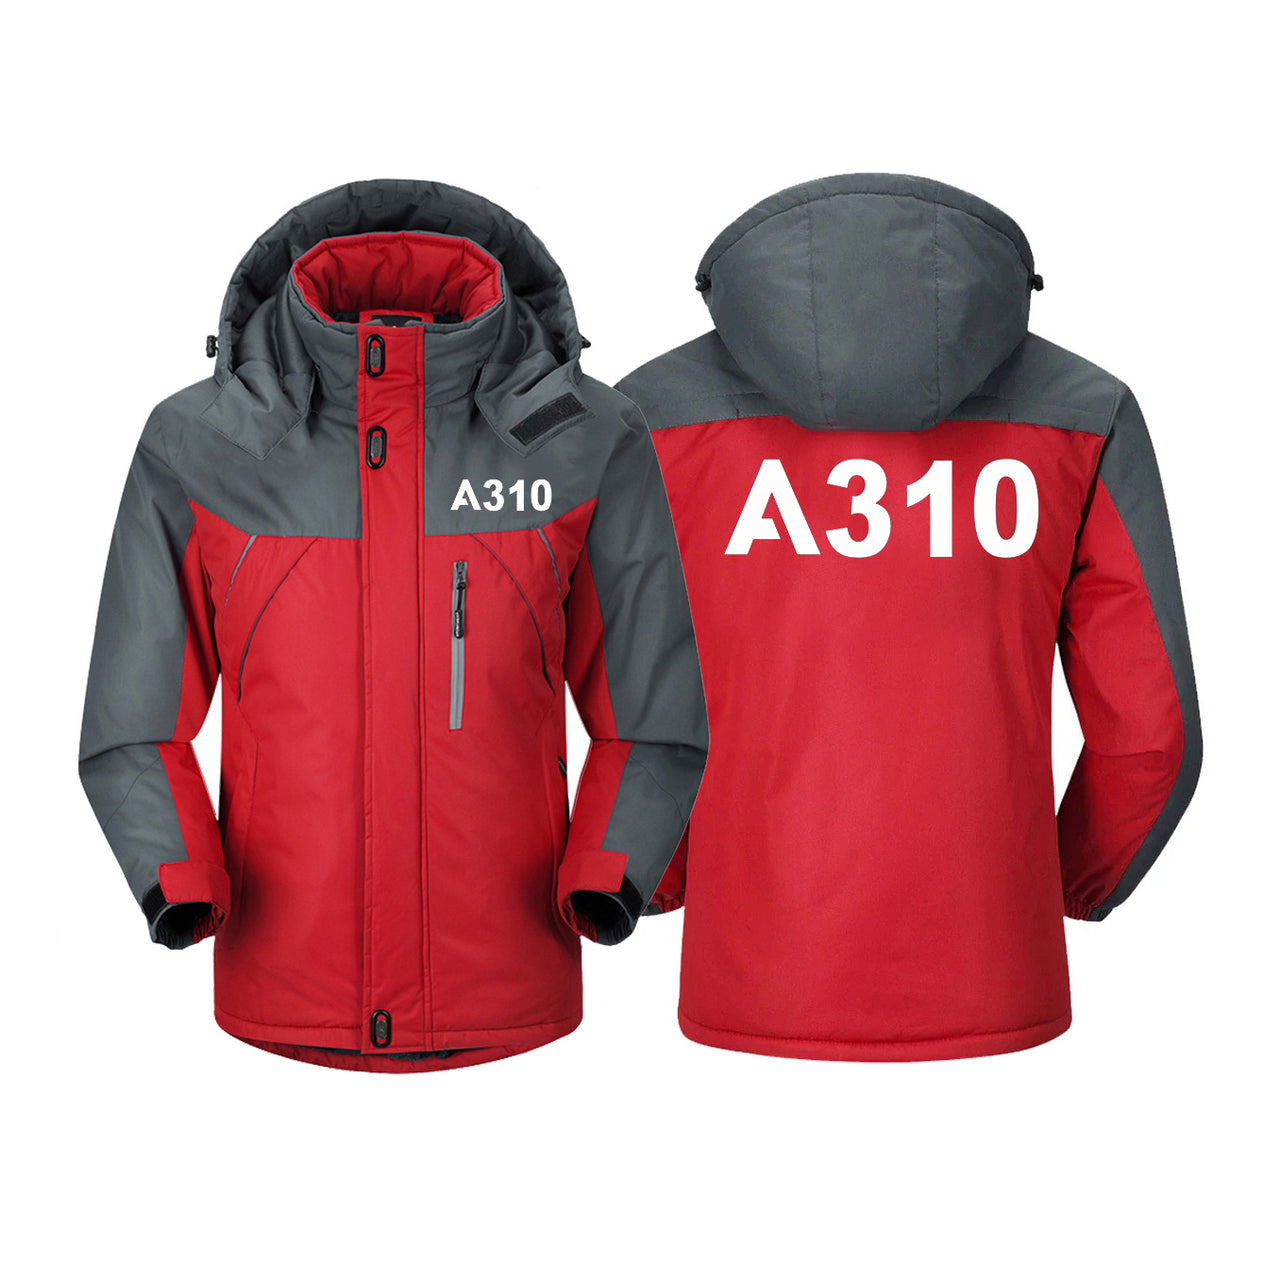 A310 Flat Text Designed Thick Winter Jackets